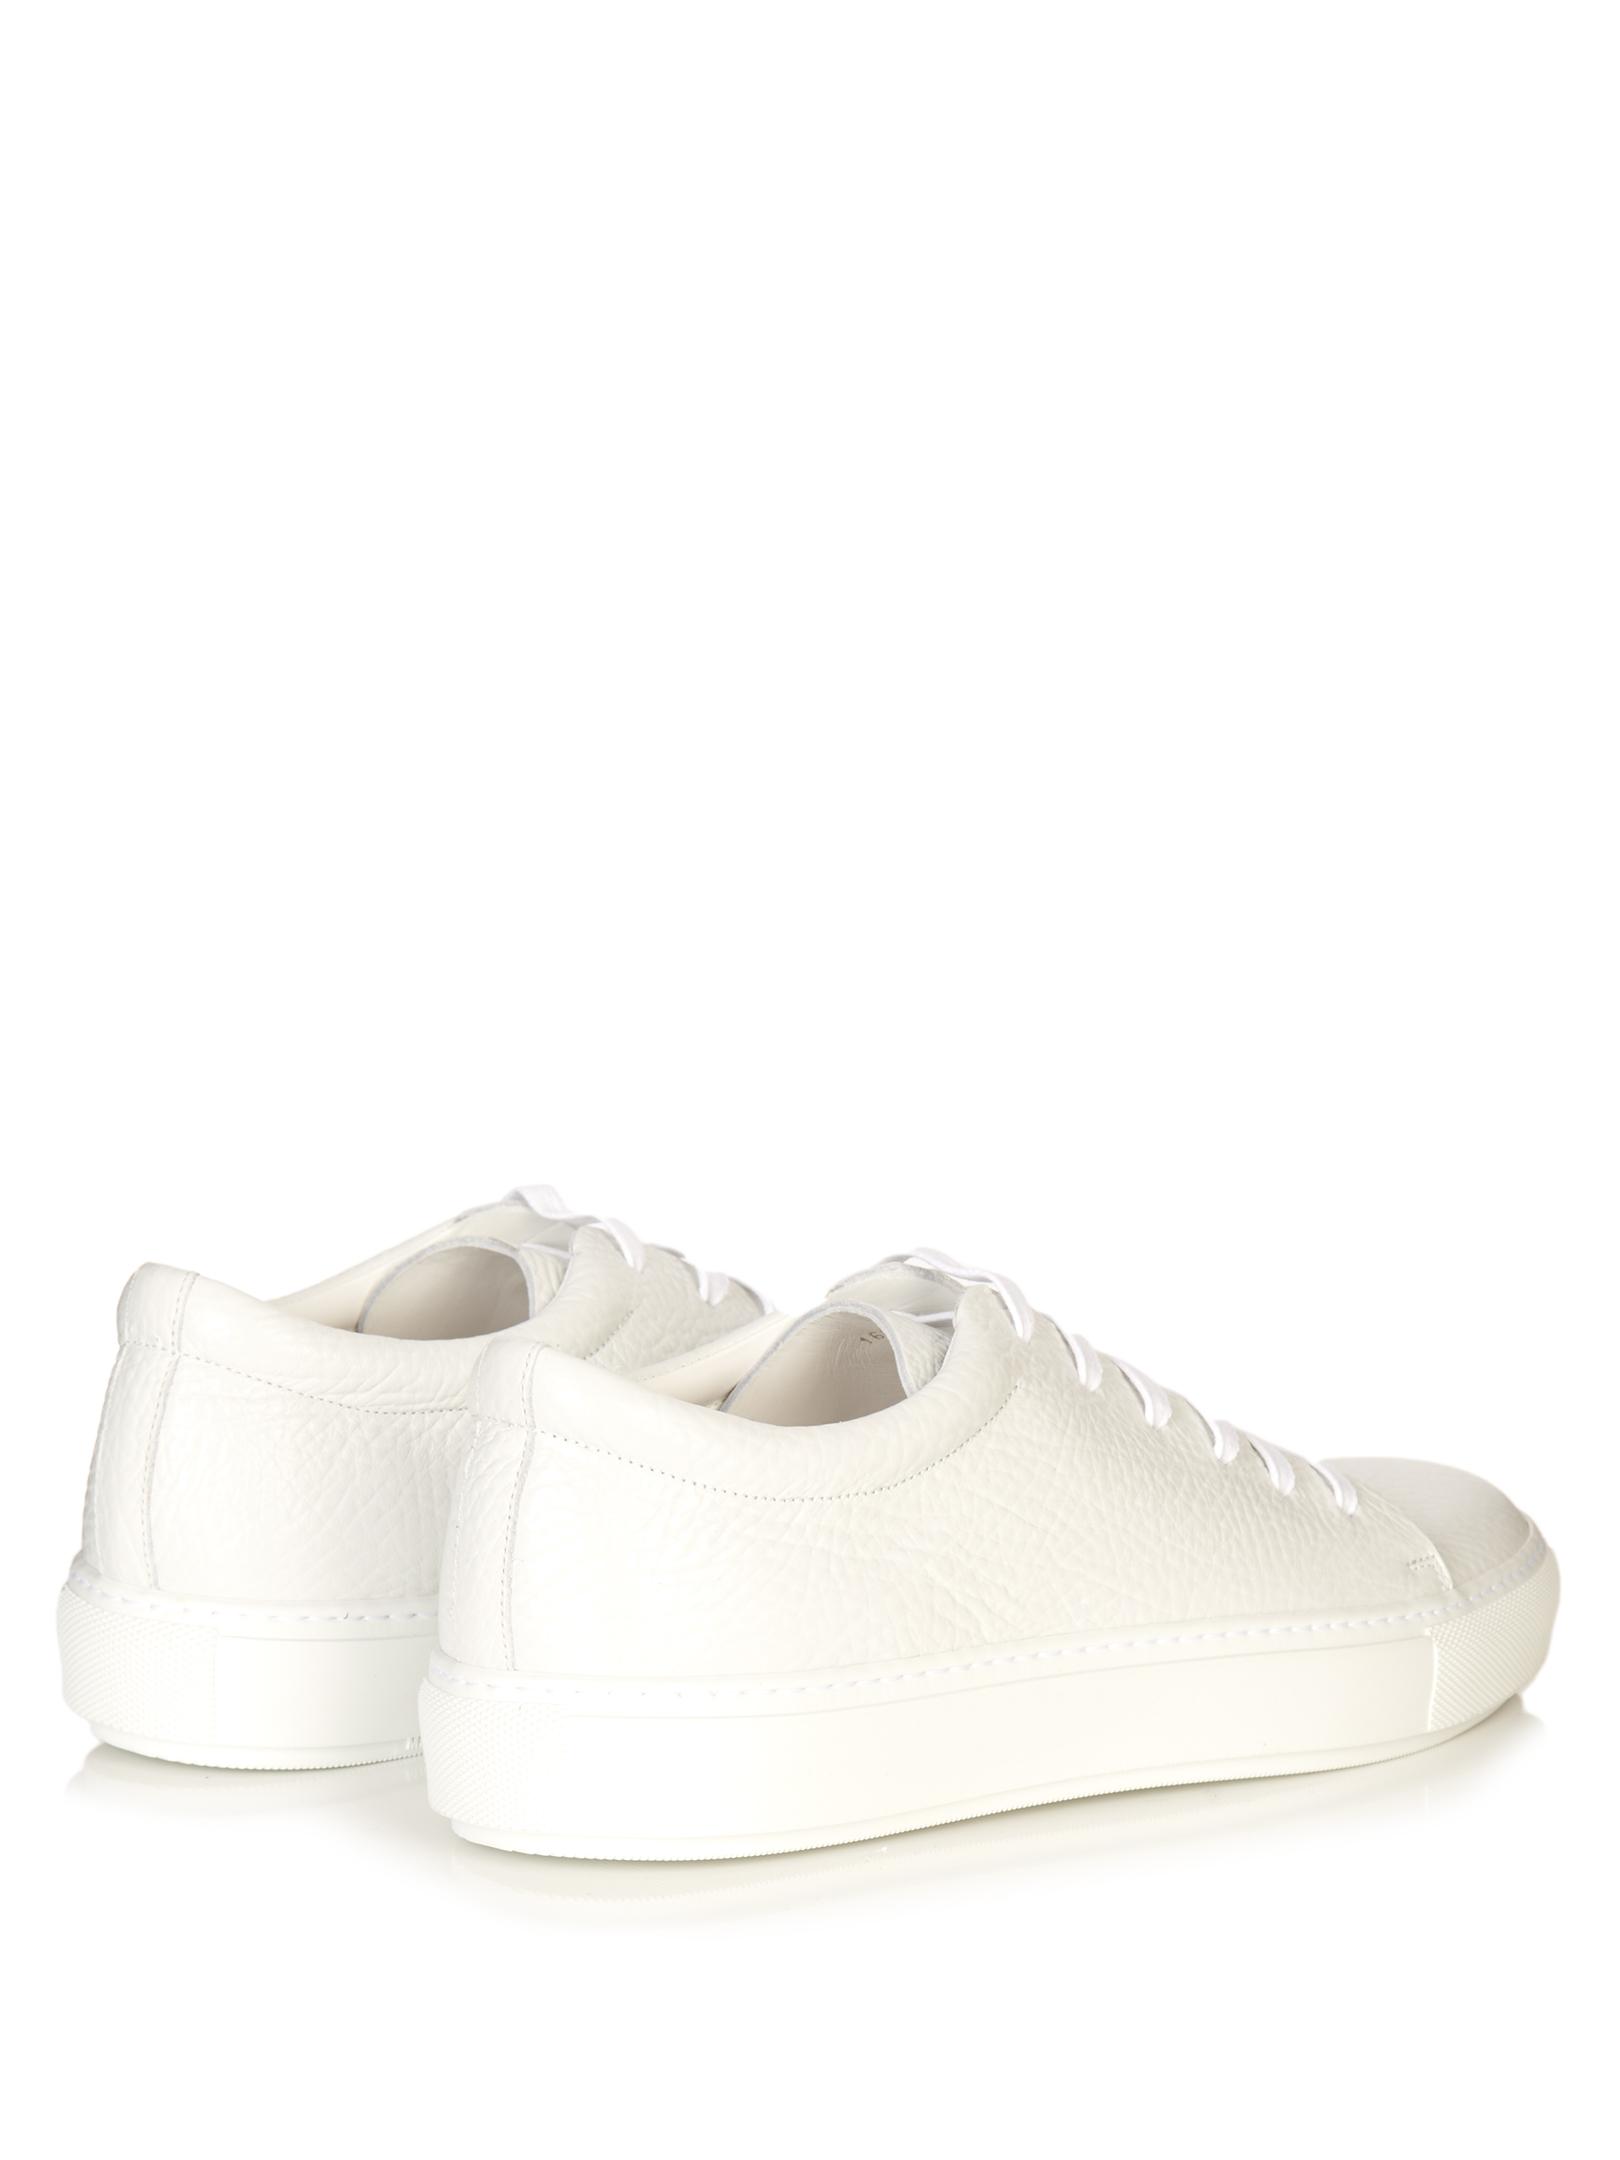 Acne Studios Adrian Low-top Leather Trainers for Men | Lyst